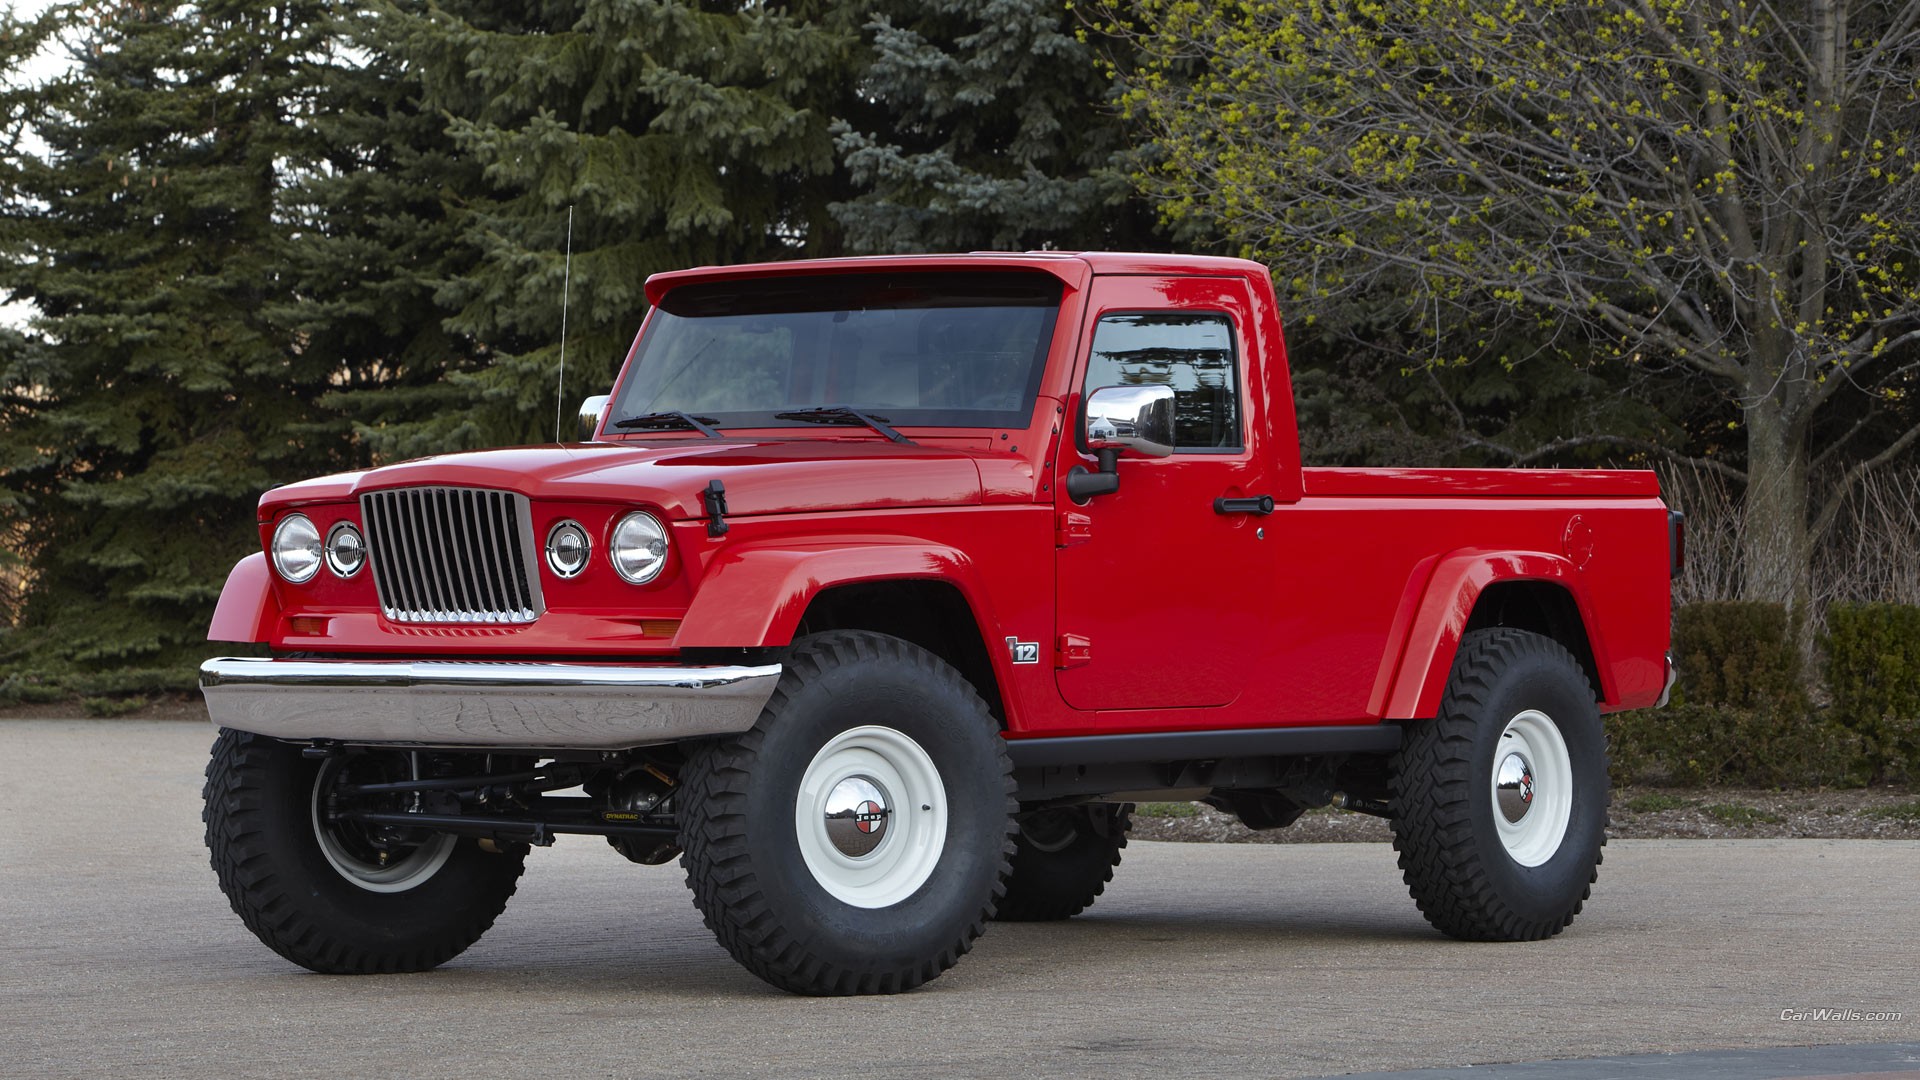 General 1920x1080 Jeep J-12 concept cars red cars watermarked vehicle pickup trucks American cars car